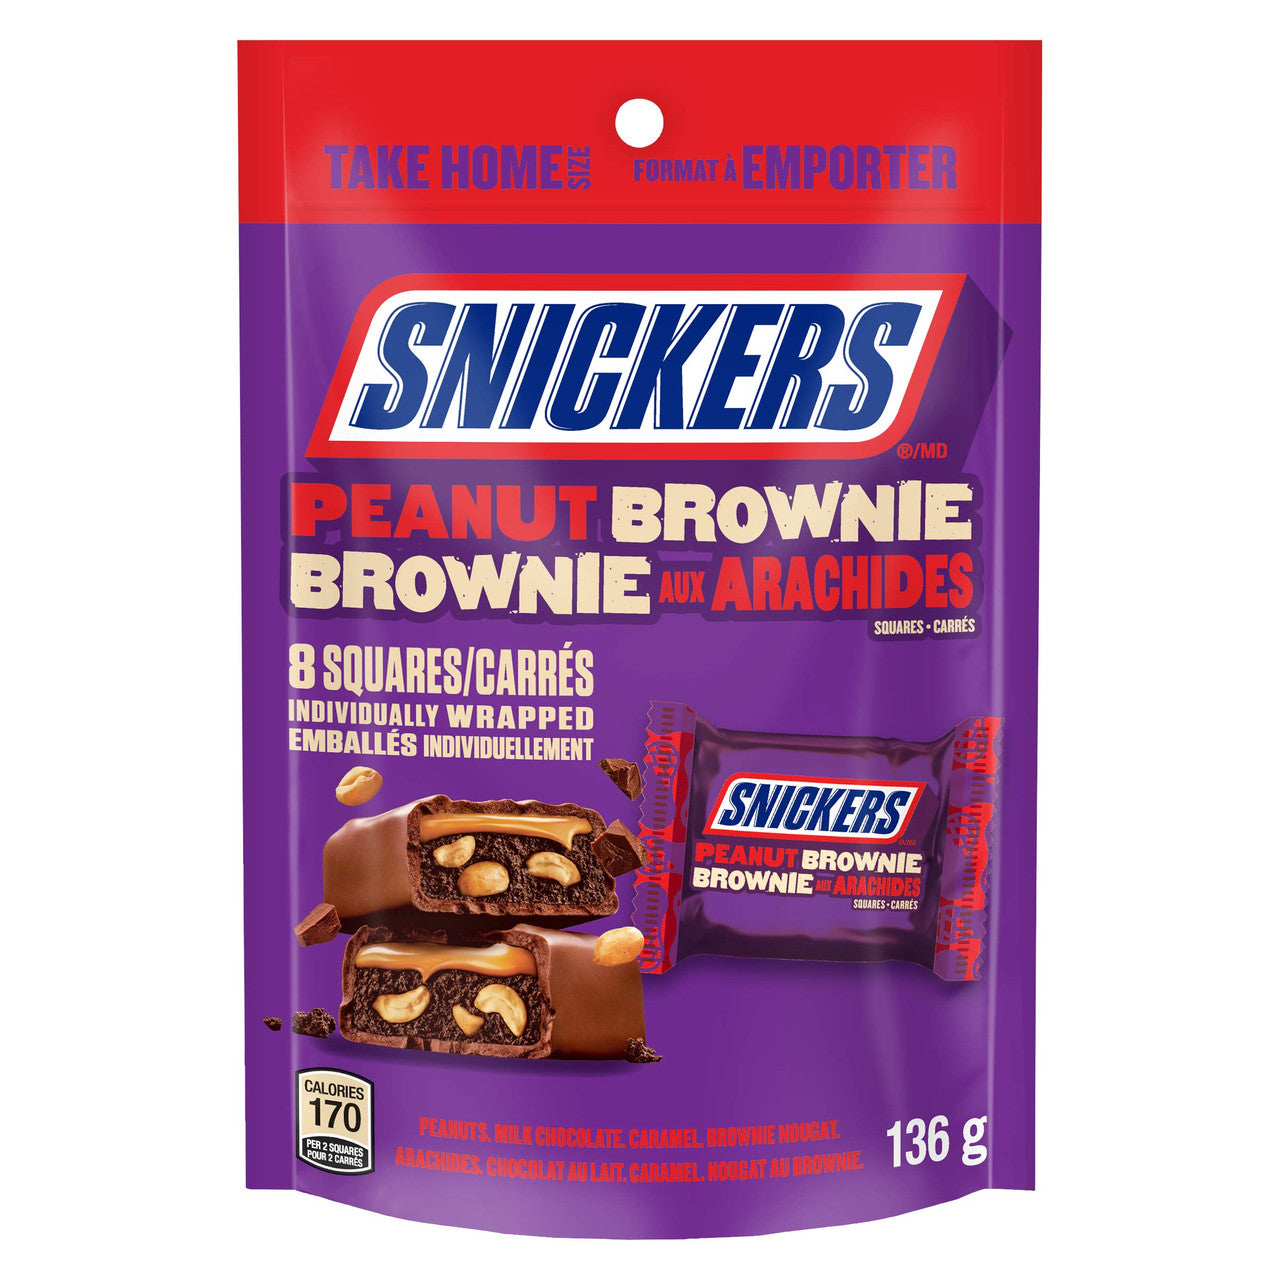 Snickers Peanut Brownie Caramel Chocolate Squares, Bag, 136g/4.8 oz., {Imported from Canada}